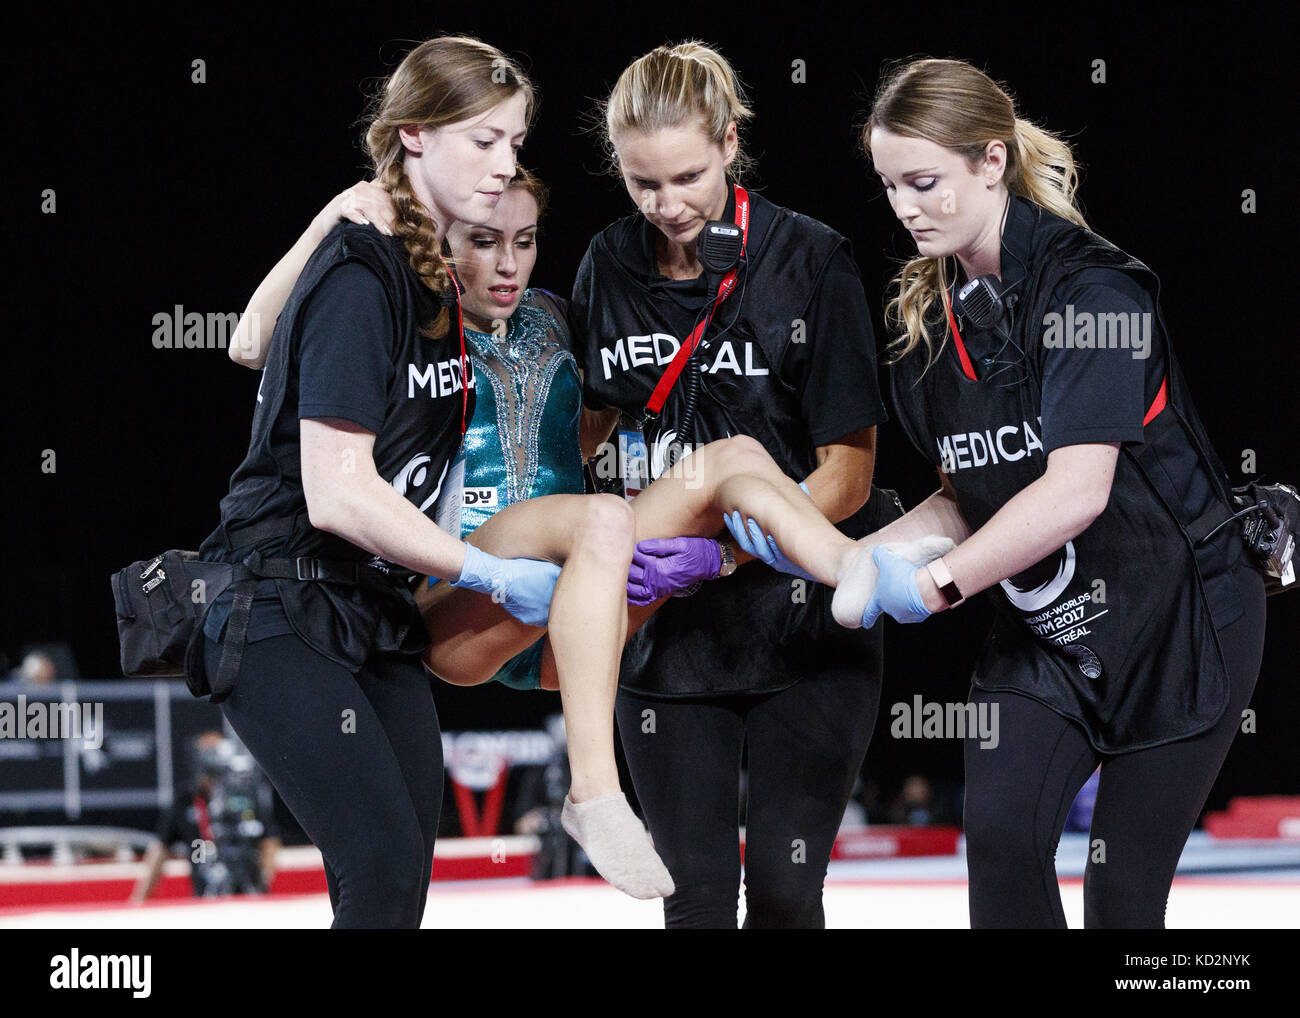 Montreal, Quebec, Canada. 8th Oct, 2017. VANESSA FERRARI of Italy receives medical attention while competing on the floor exercise during the individual apparatus finals of the Artistic Gymnastics World Championships on October 8, 2017 at Olympic Stadium in Montreal, Canada. Credit: Andrew Chin/ZUMA Wire/ZUMAPRESS.com/Alamy Live News Stock Photo